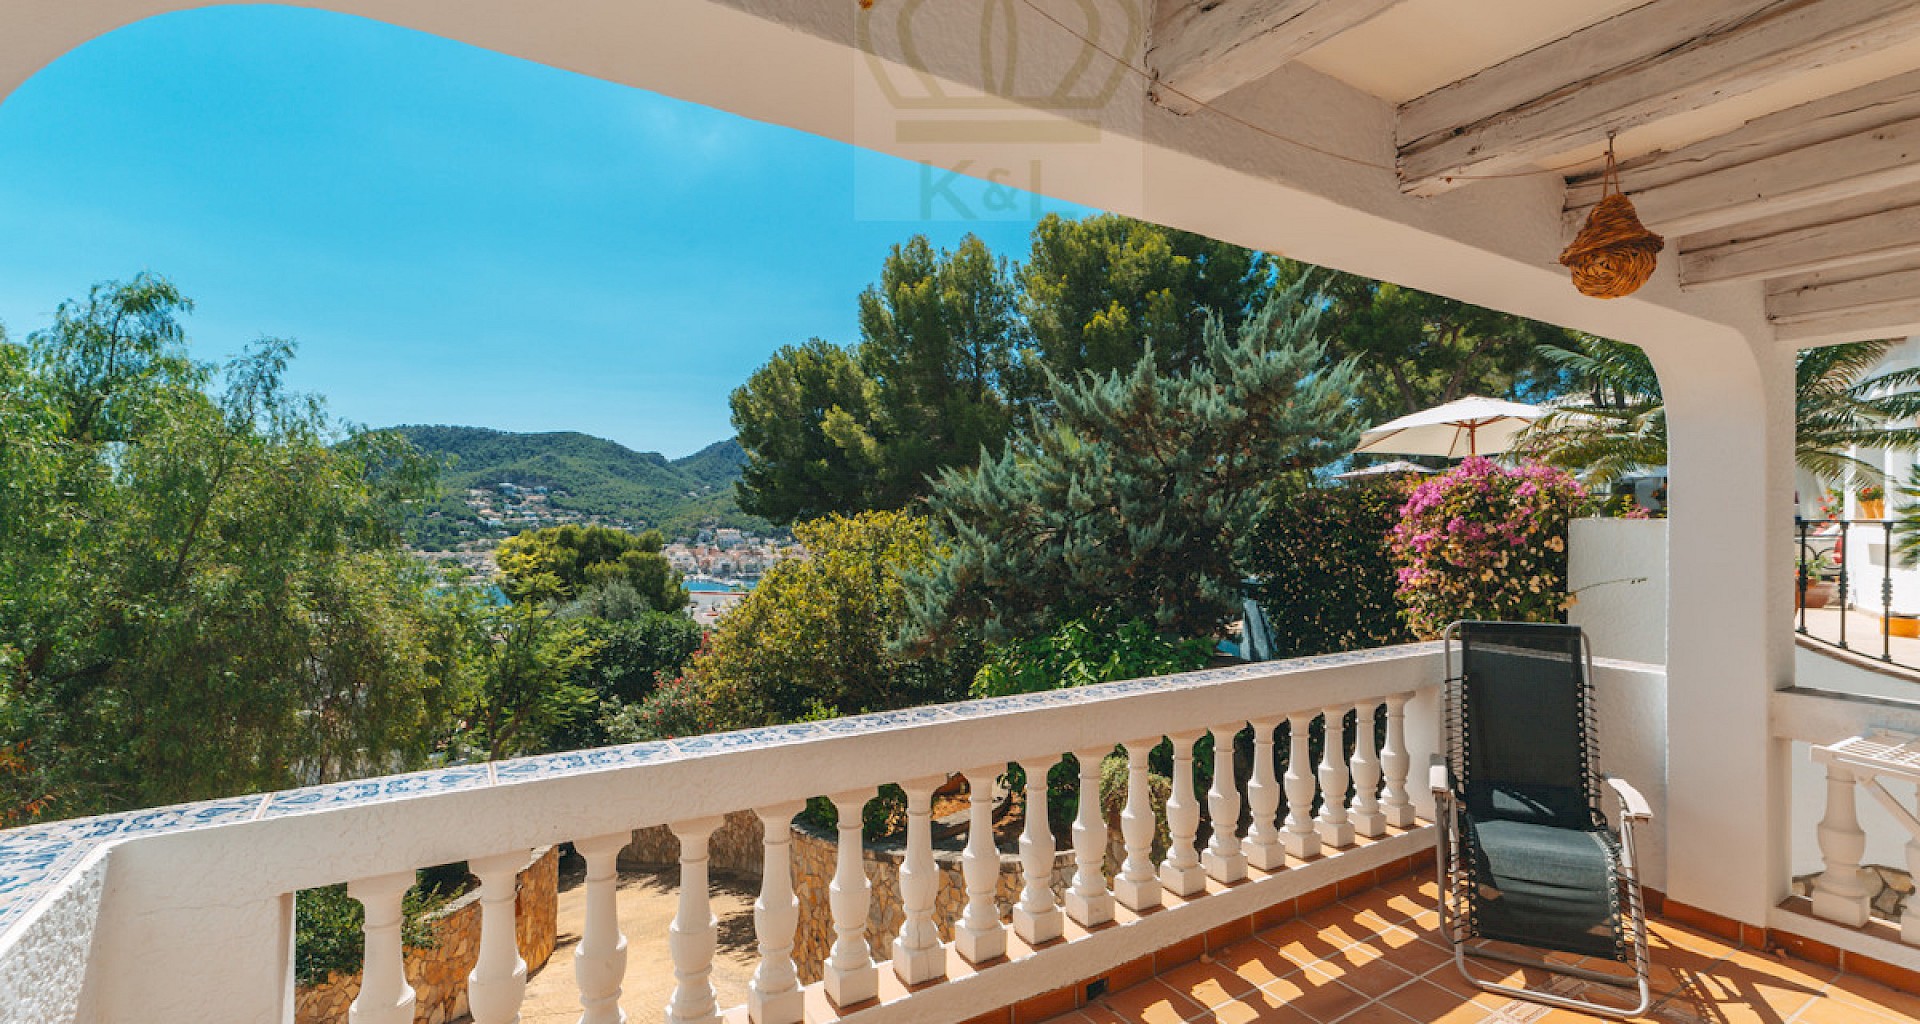 KROHN & LUEDEMANN Mediterranean villa in Port Andratx with lots of charm and potential 1) Terrace with port view - guest house ground floor